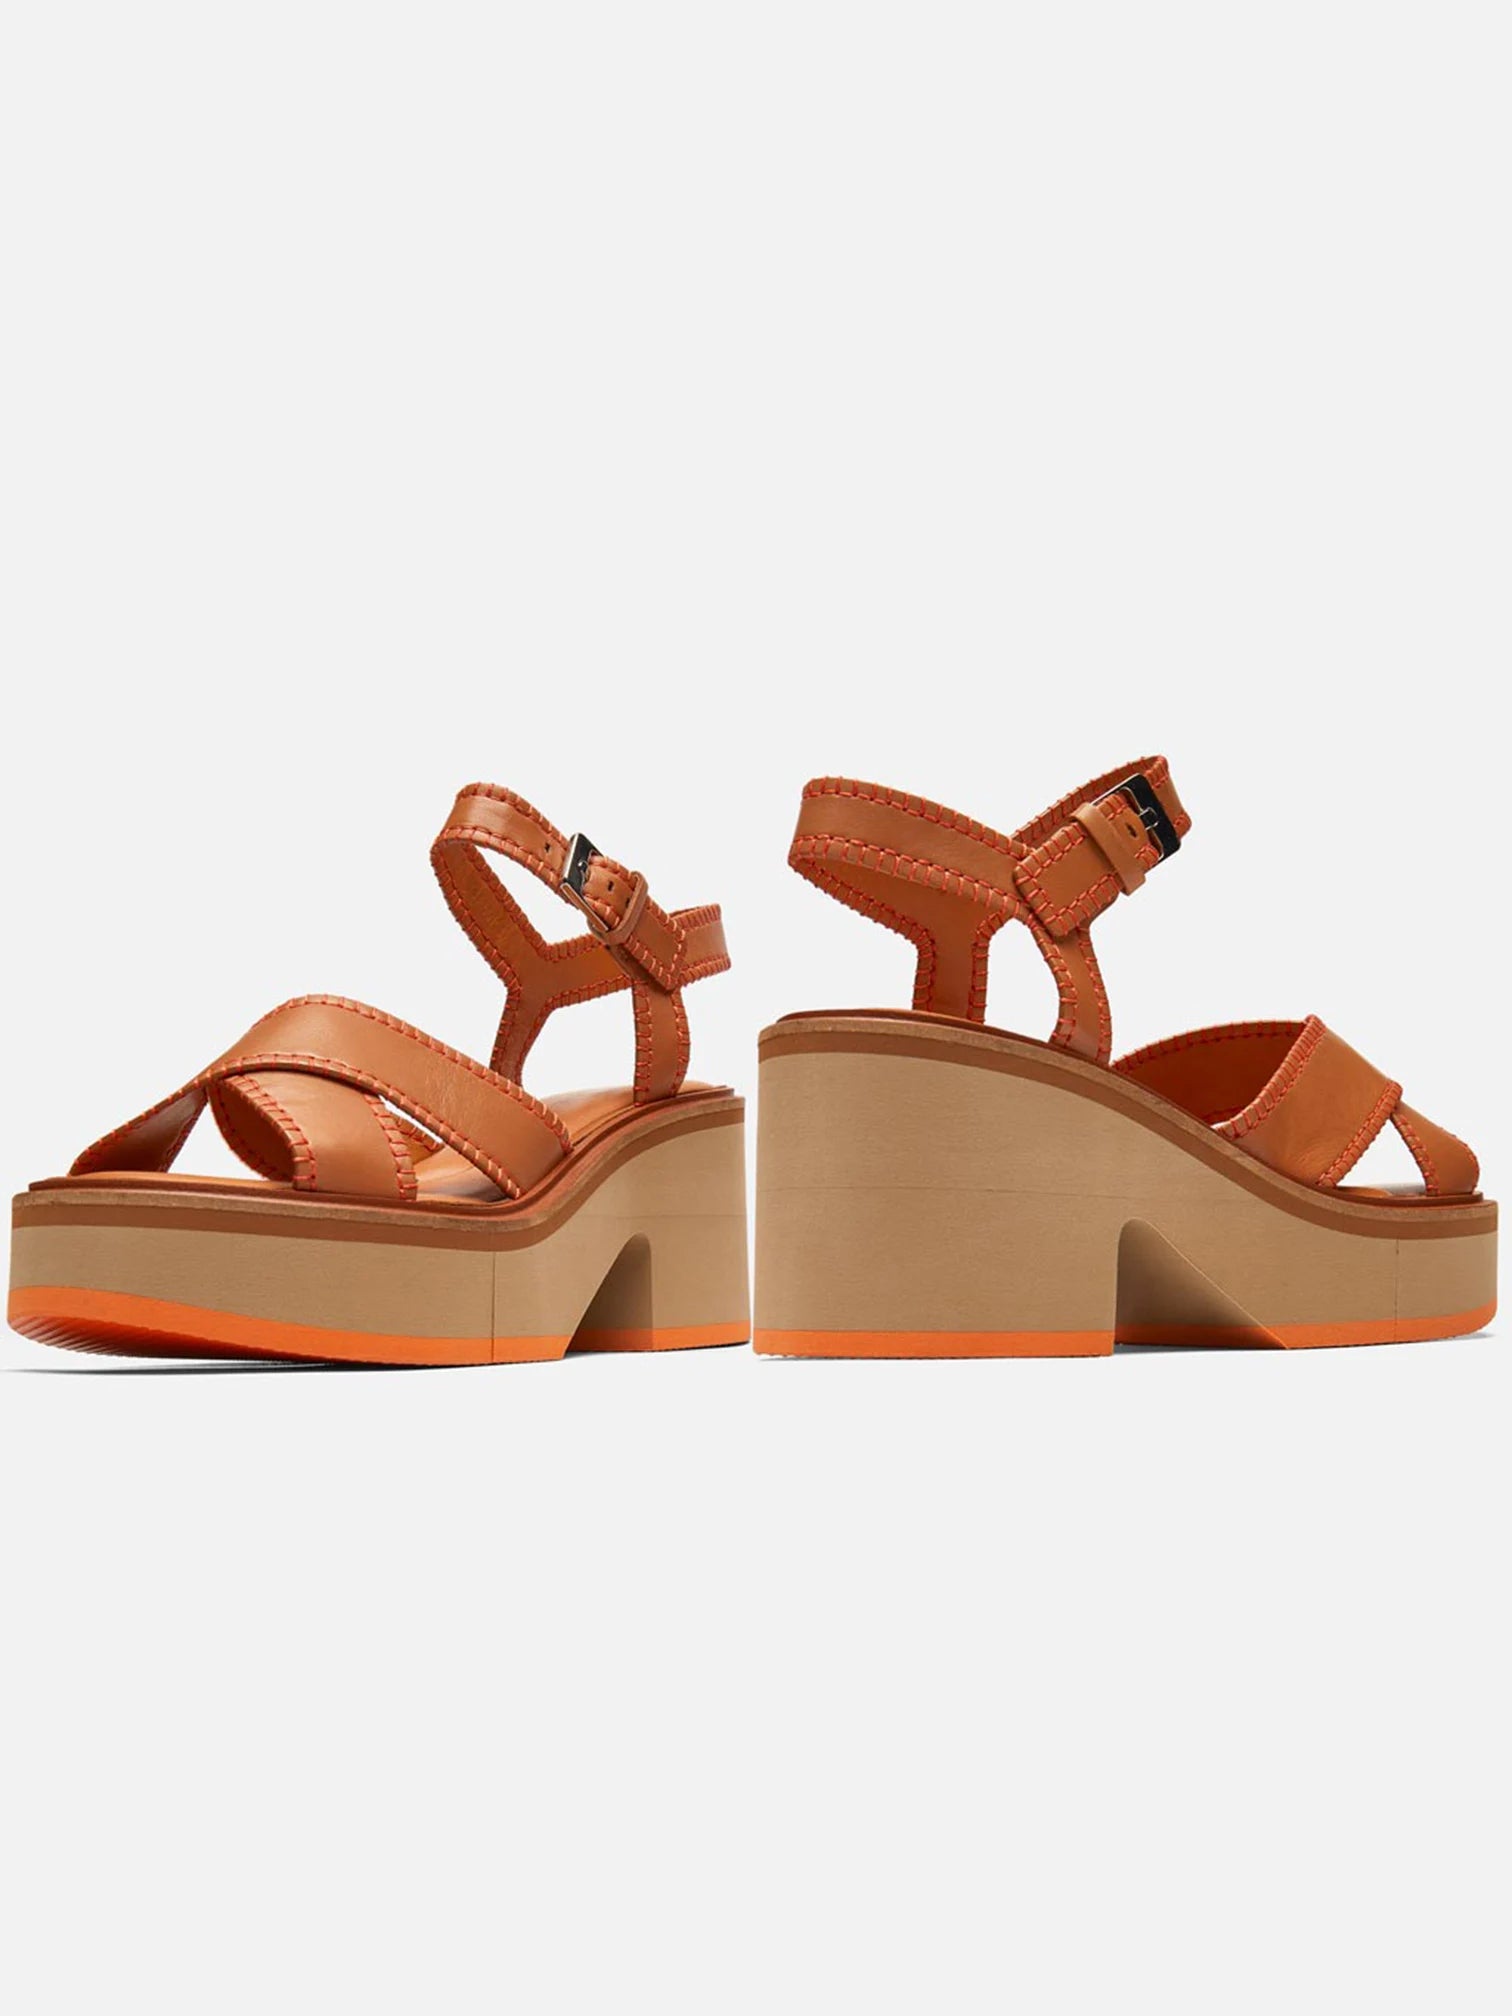 CHARLINE sandals, brown lambskin || OUTLET